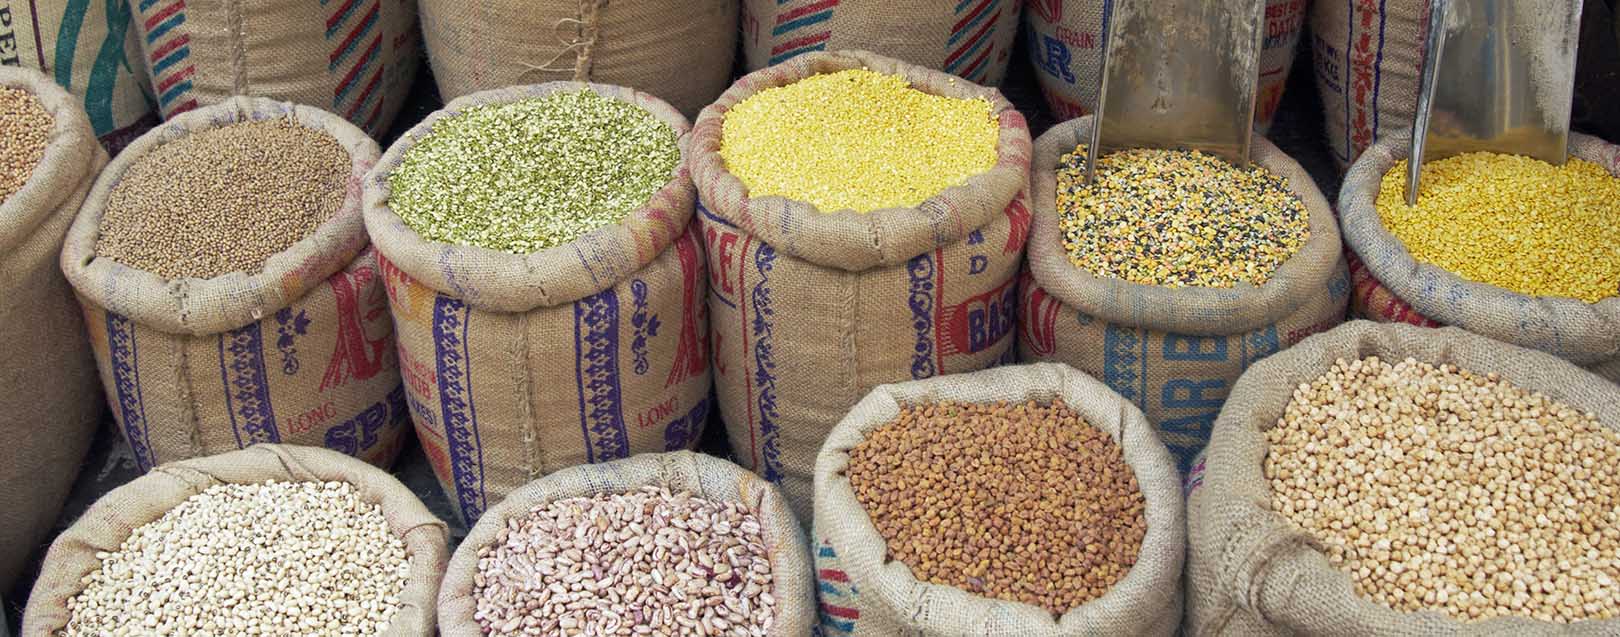 Govt to import more pulses to tackle price rise